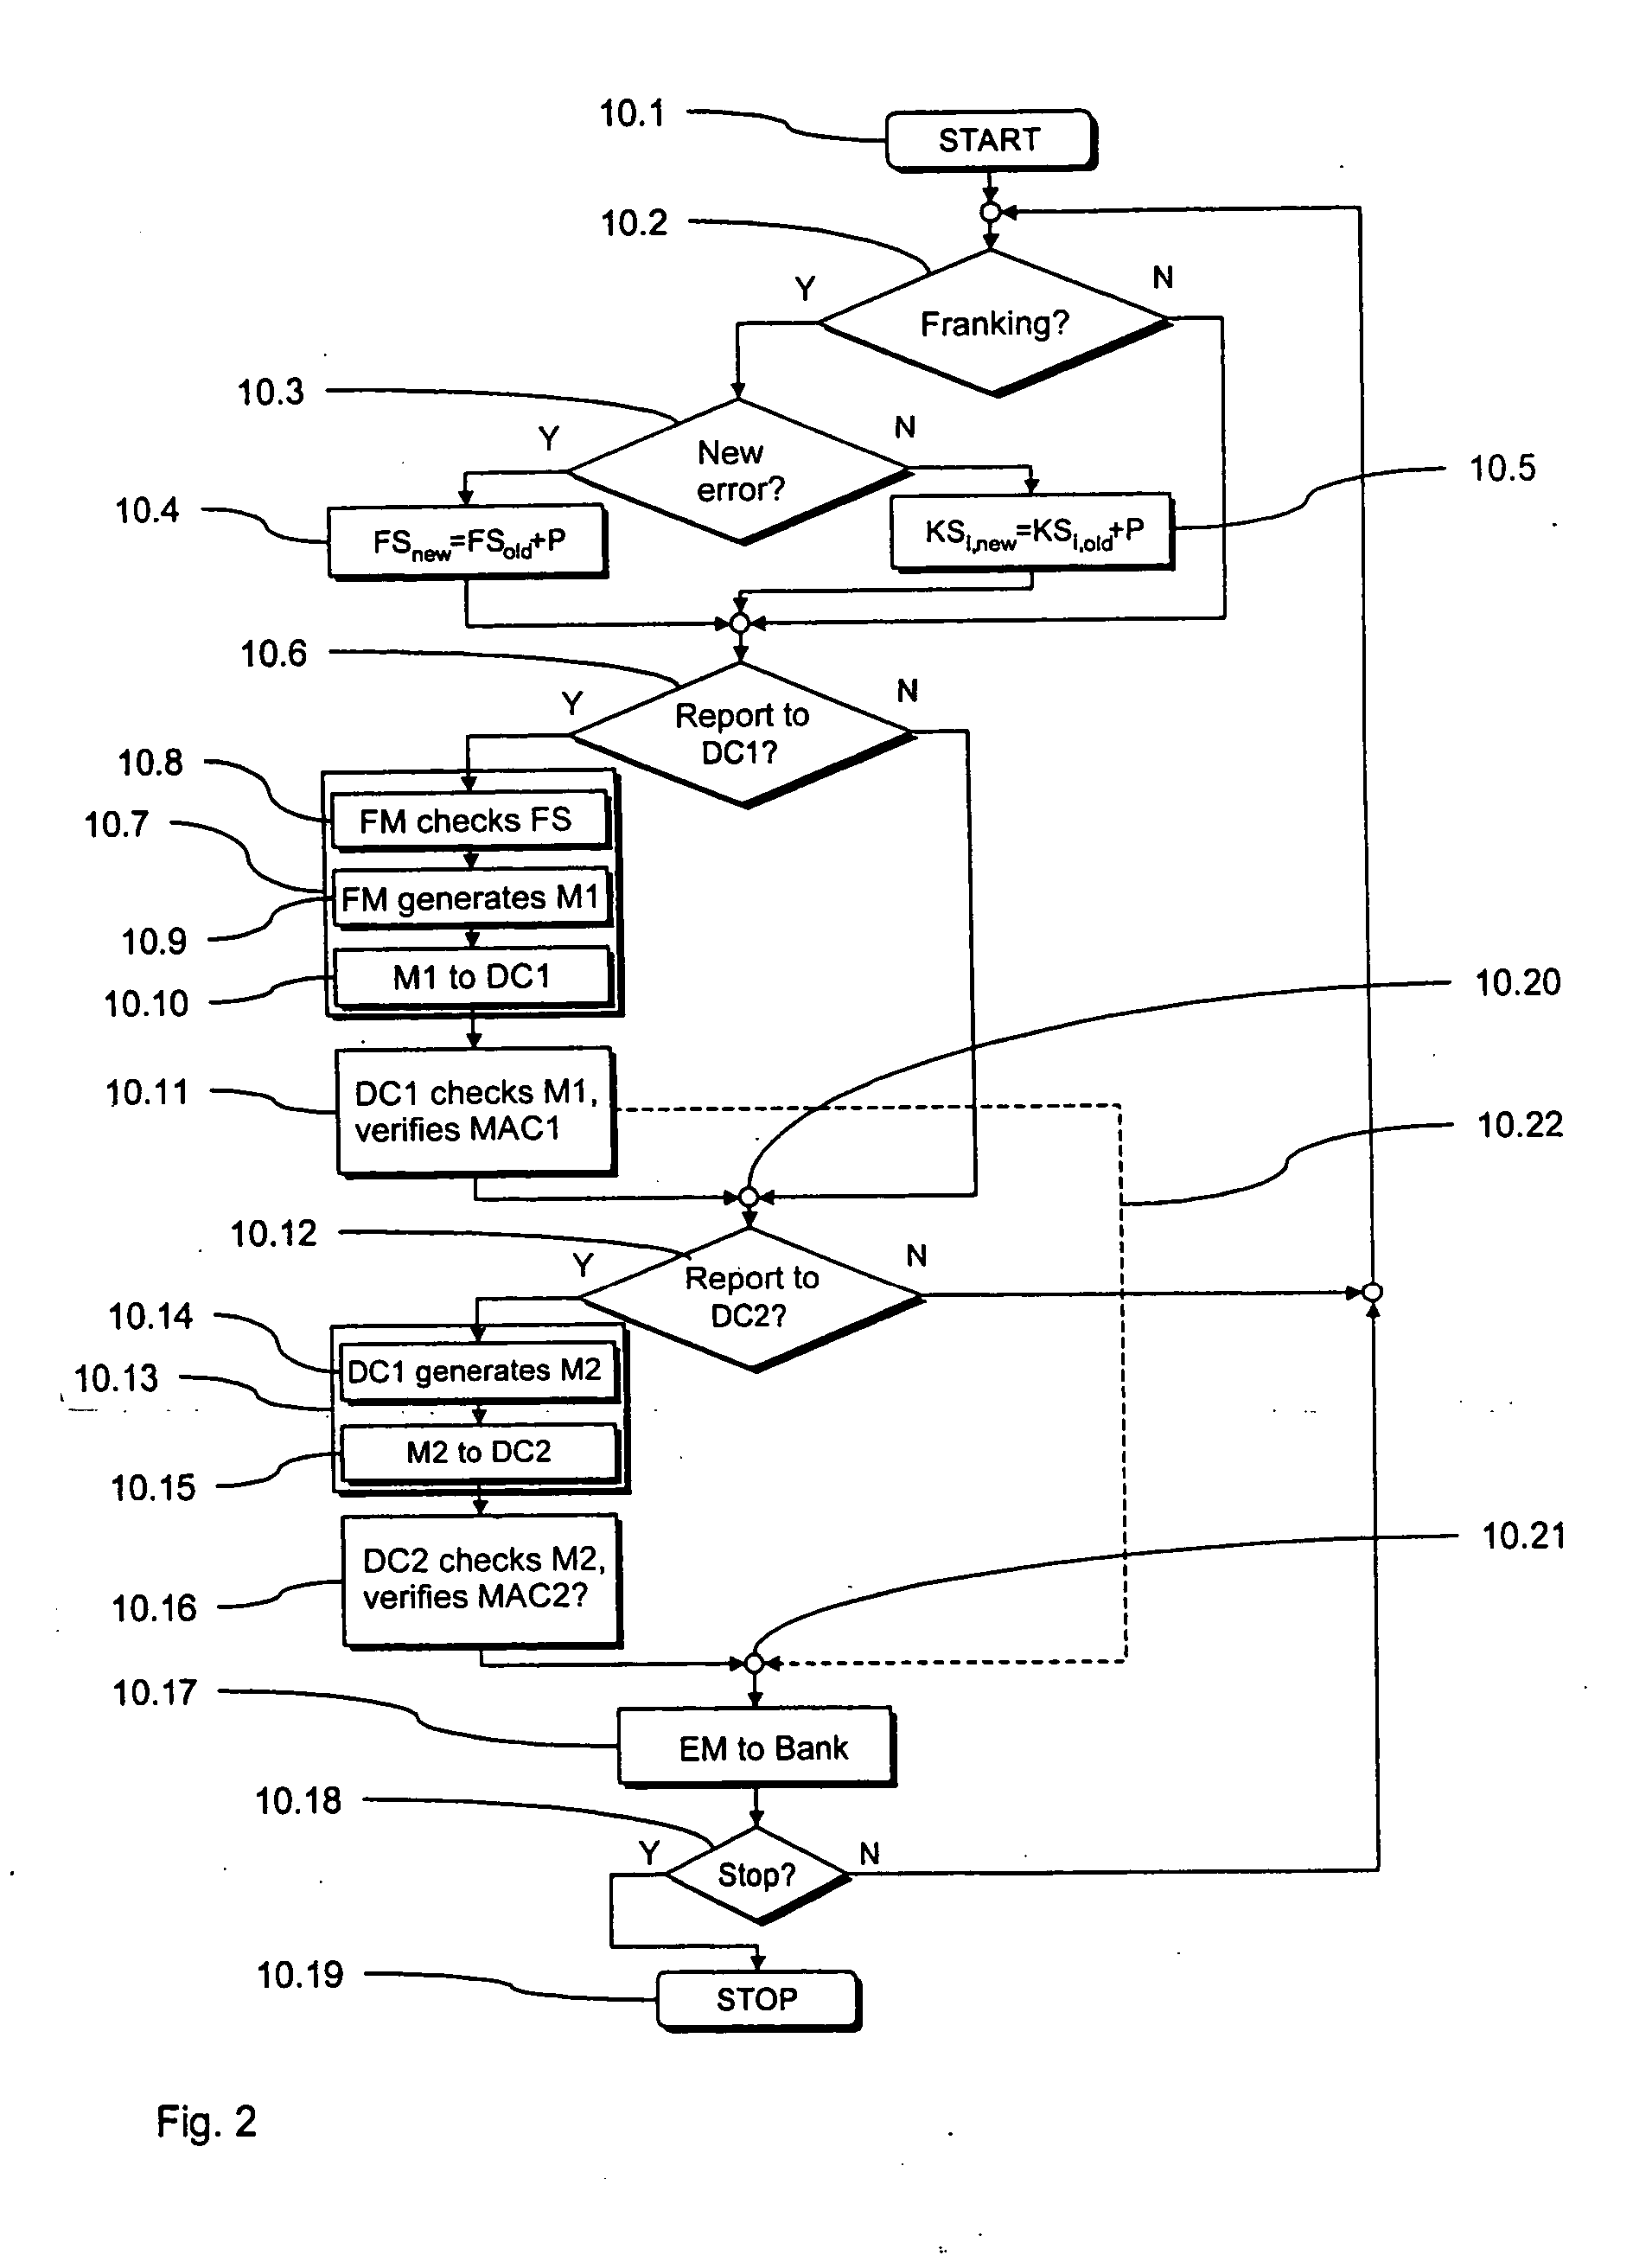 Method and arrangement for compensating a postage machine user for printed and billed, but unusable franking imprints